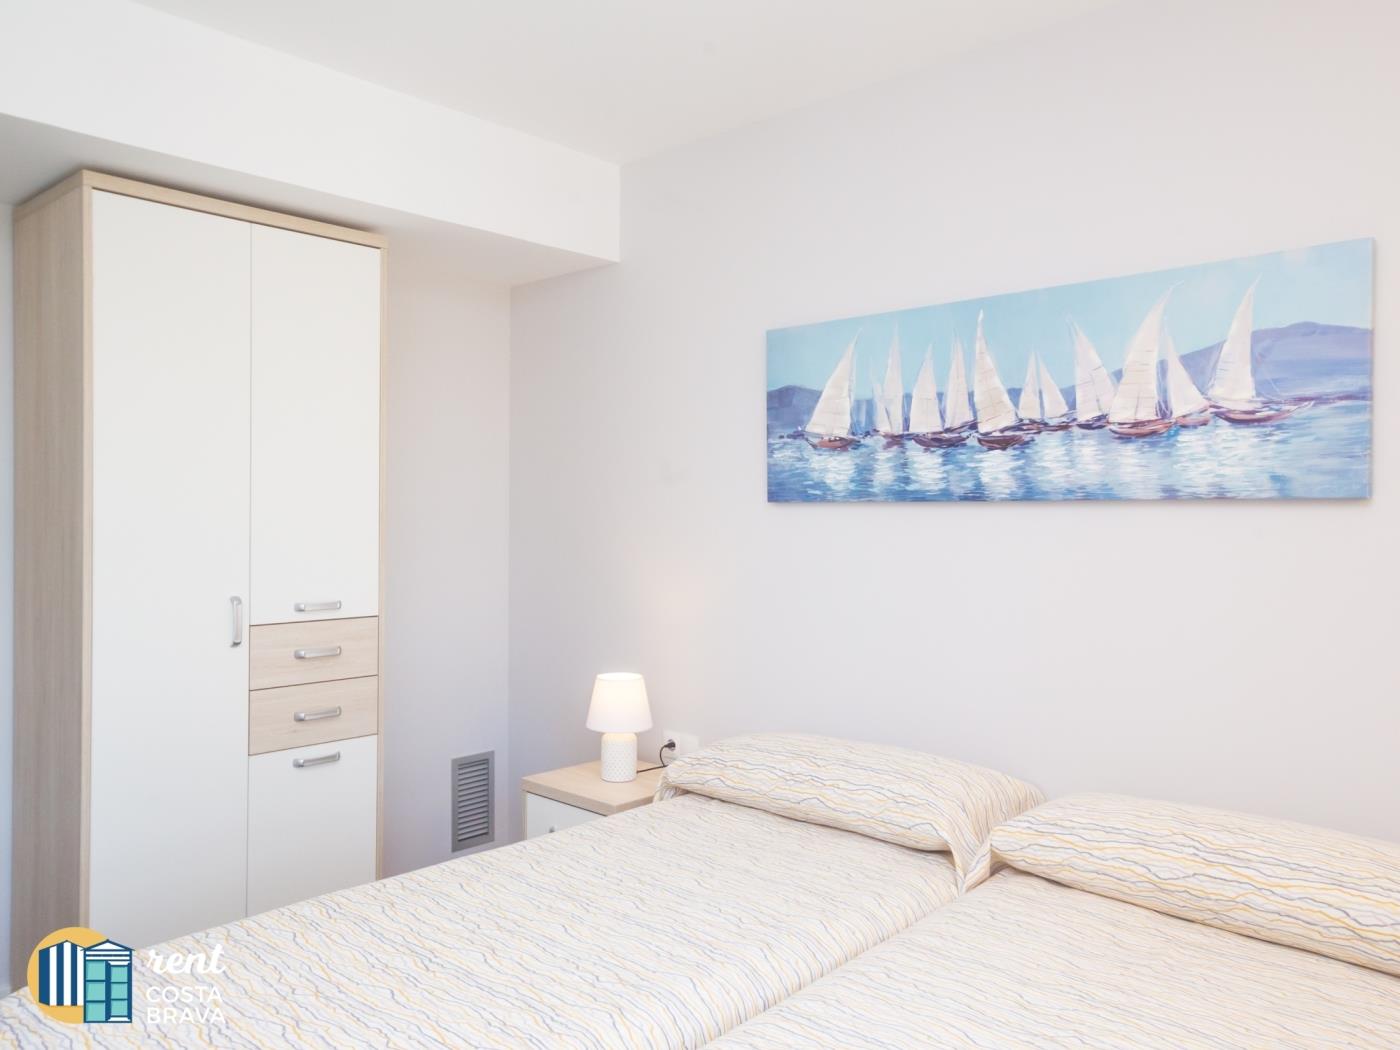 Newly built Berlin flat only 2 minutes walking distance to the city centre in Platja d'Aro